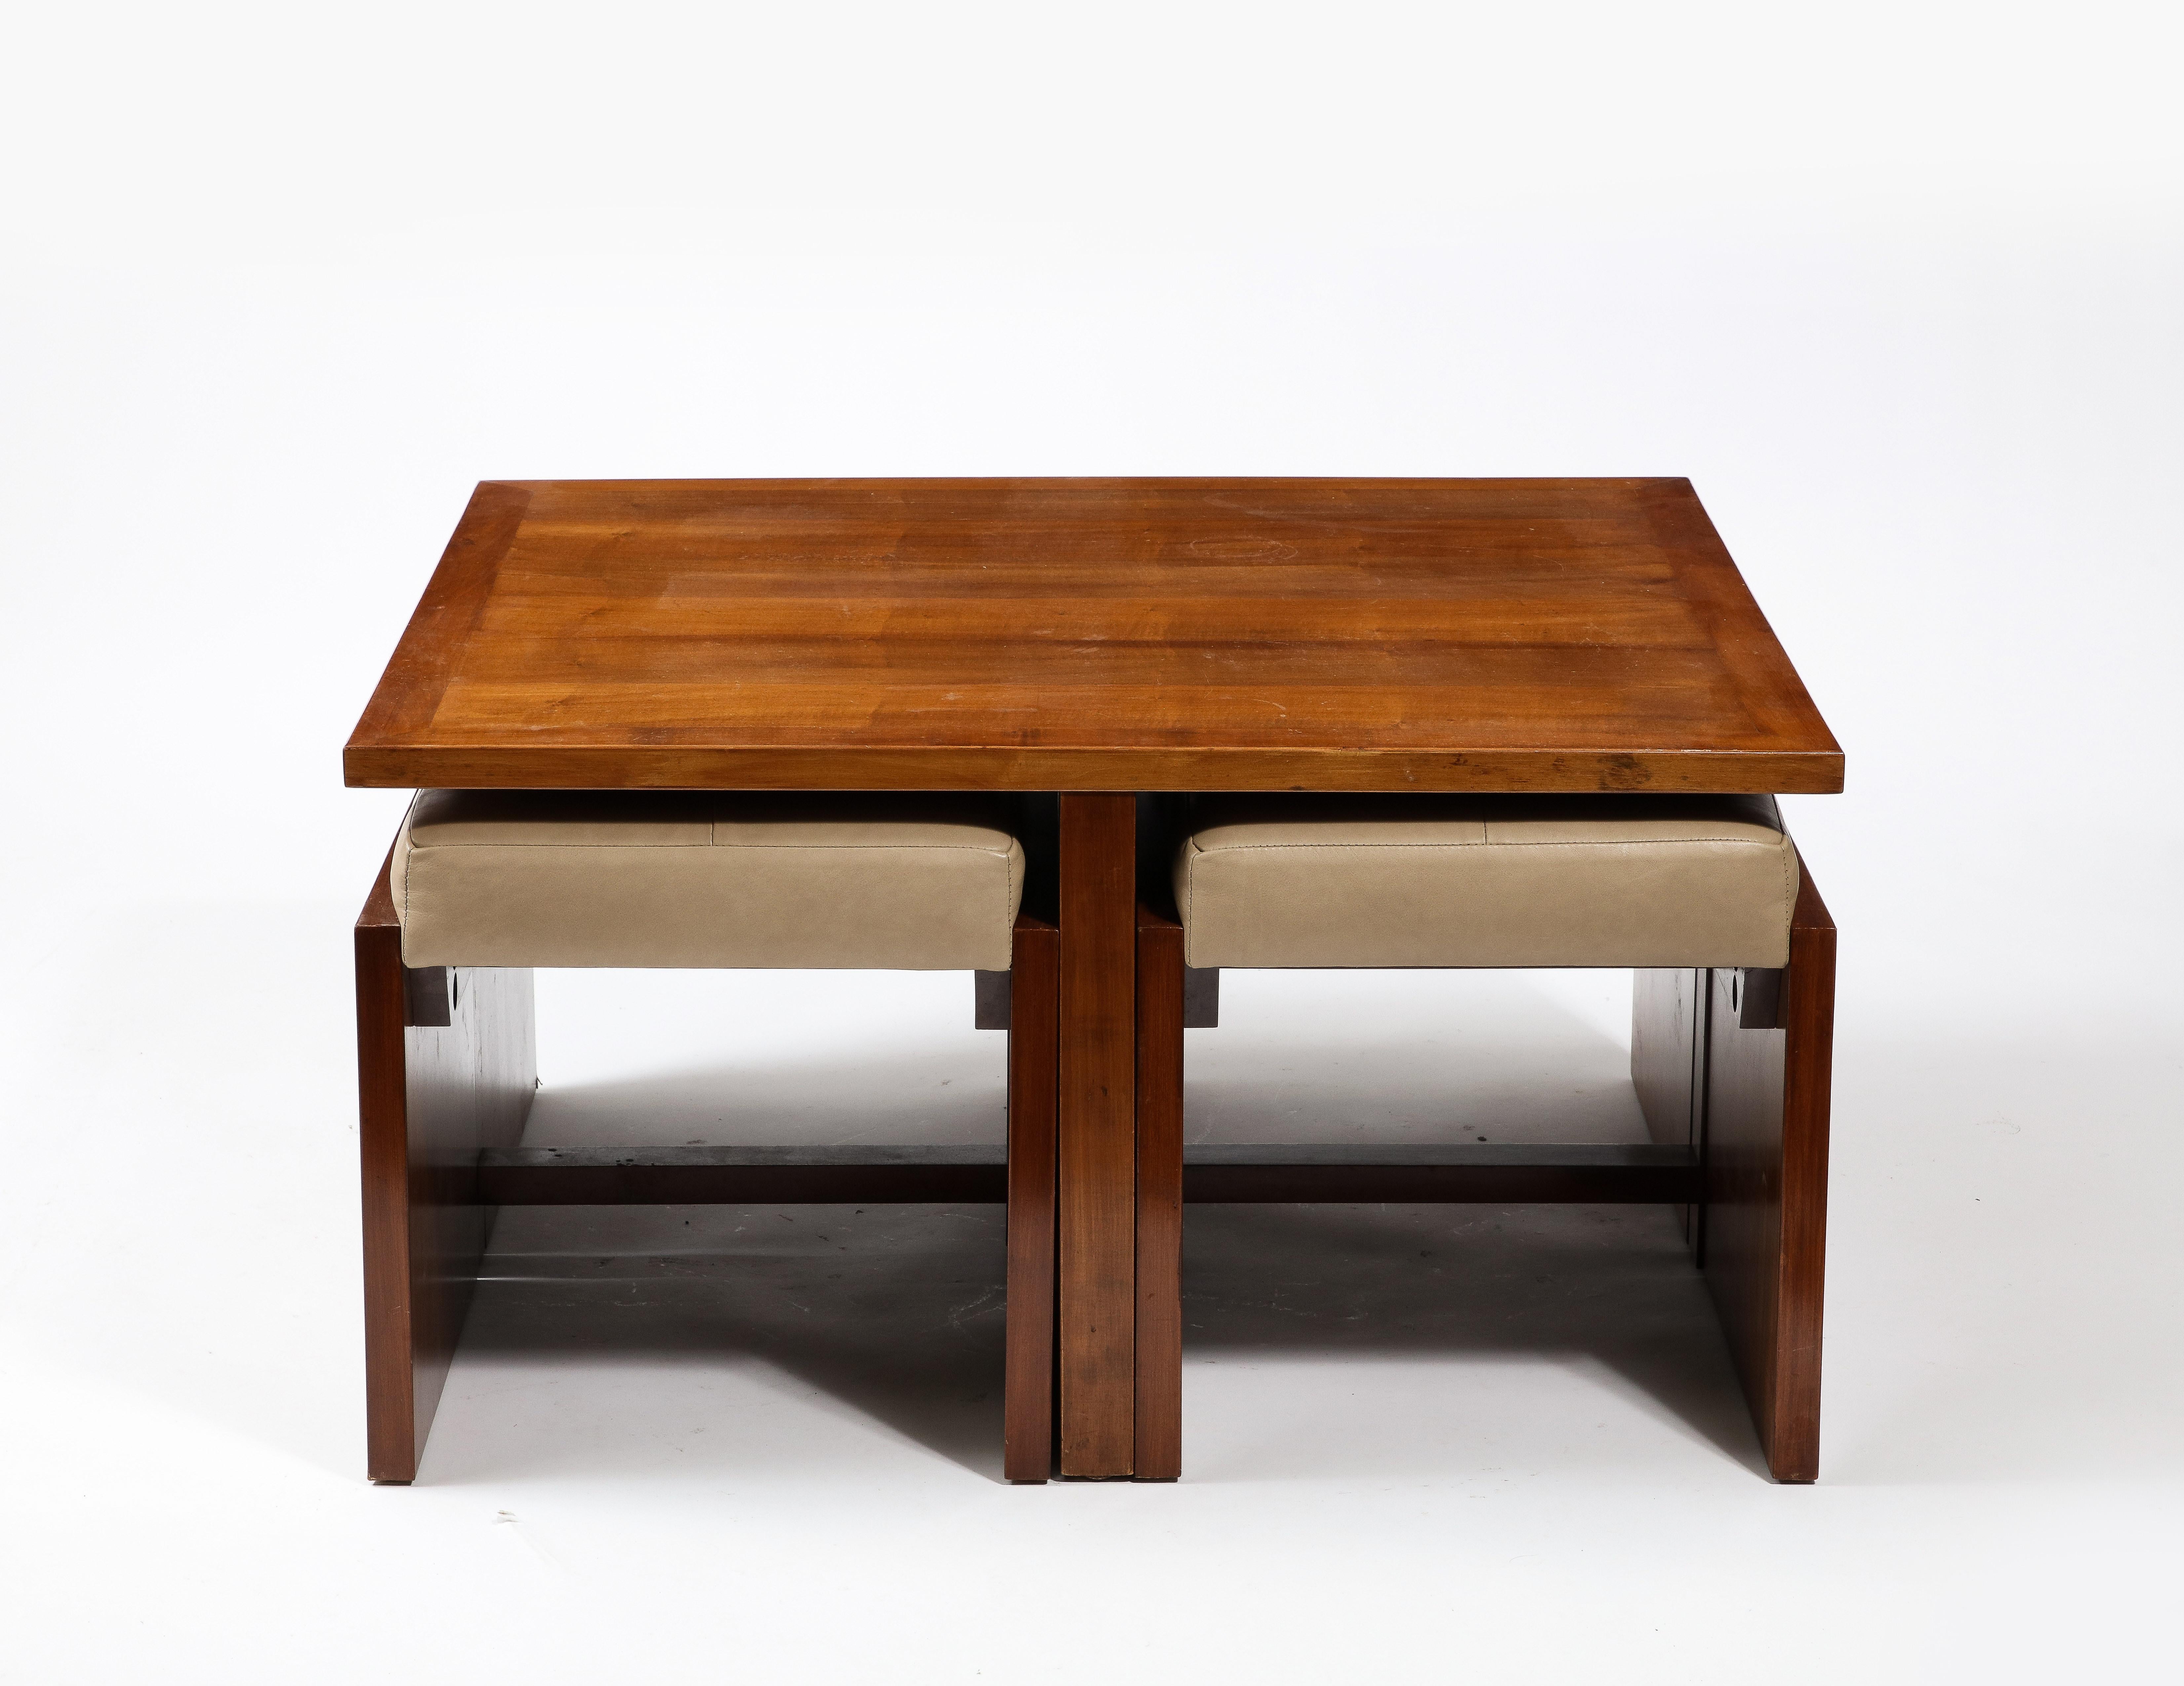 French Square Walnut Coffee Table with Four Nesting Upholstered Stools, France 1940's For Sale